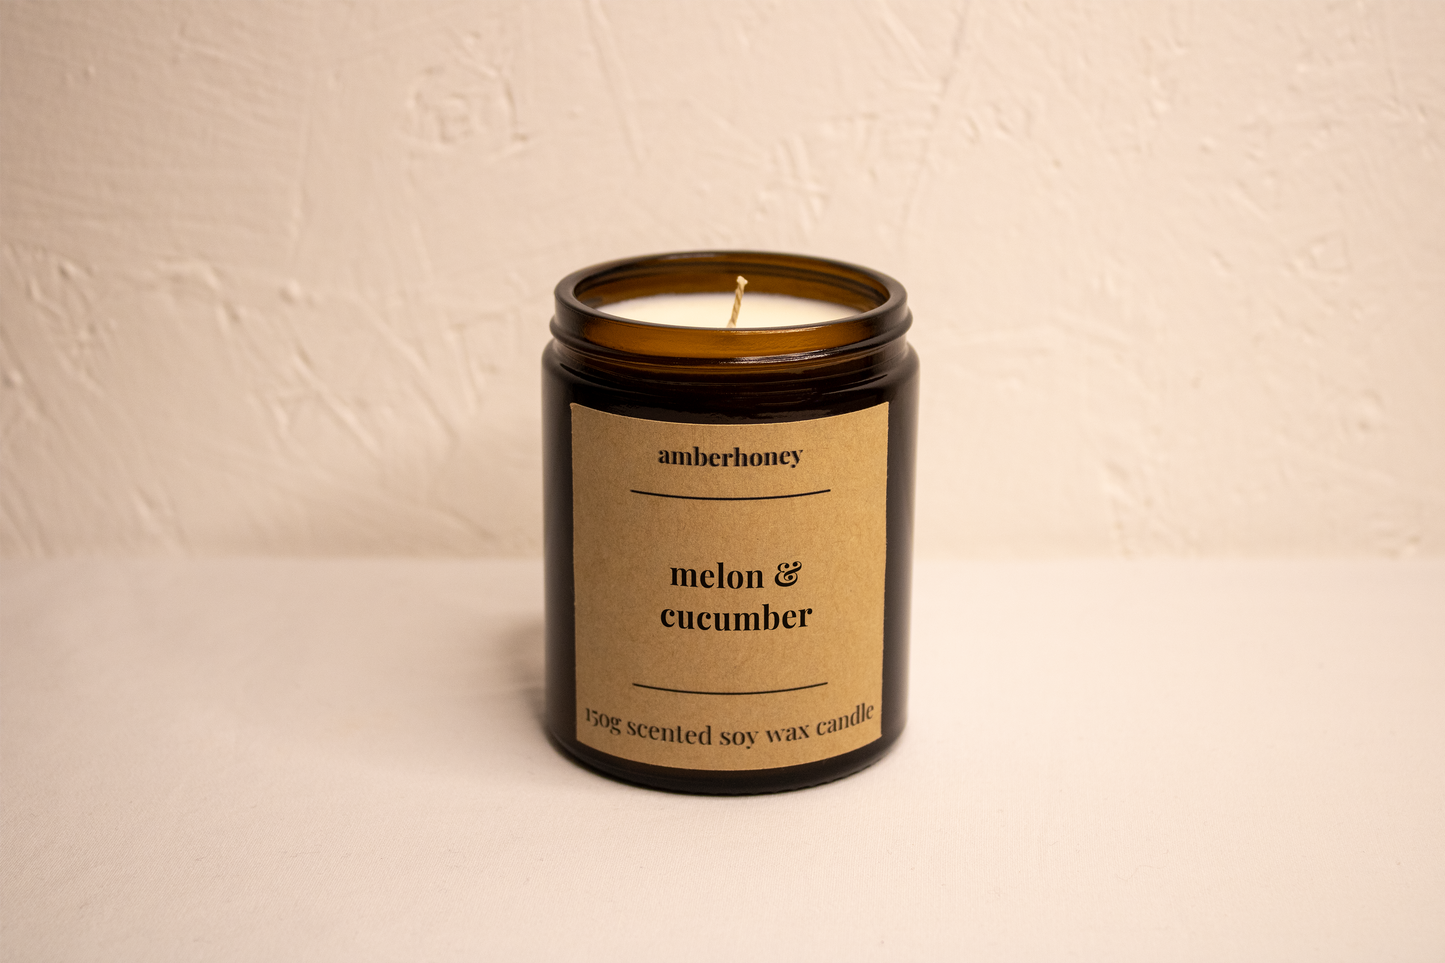 150g melon & cucumber soy wax candle